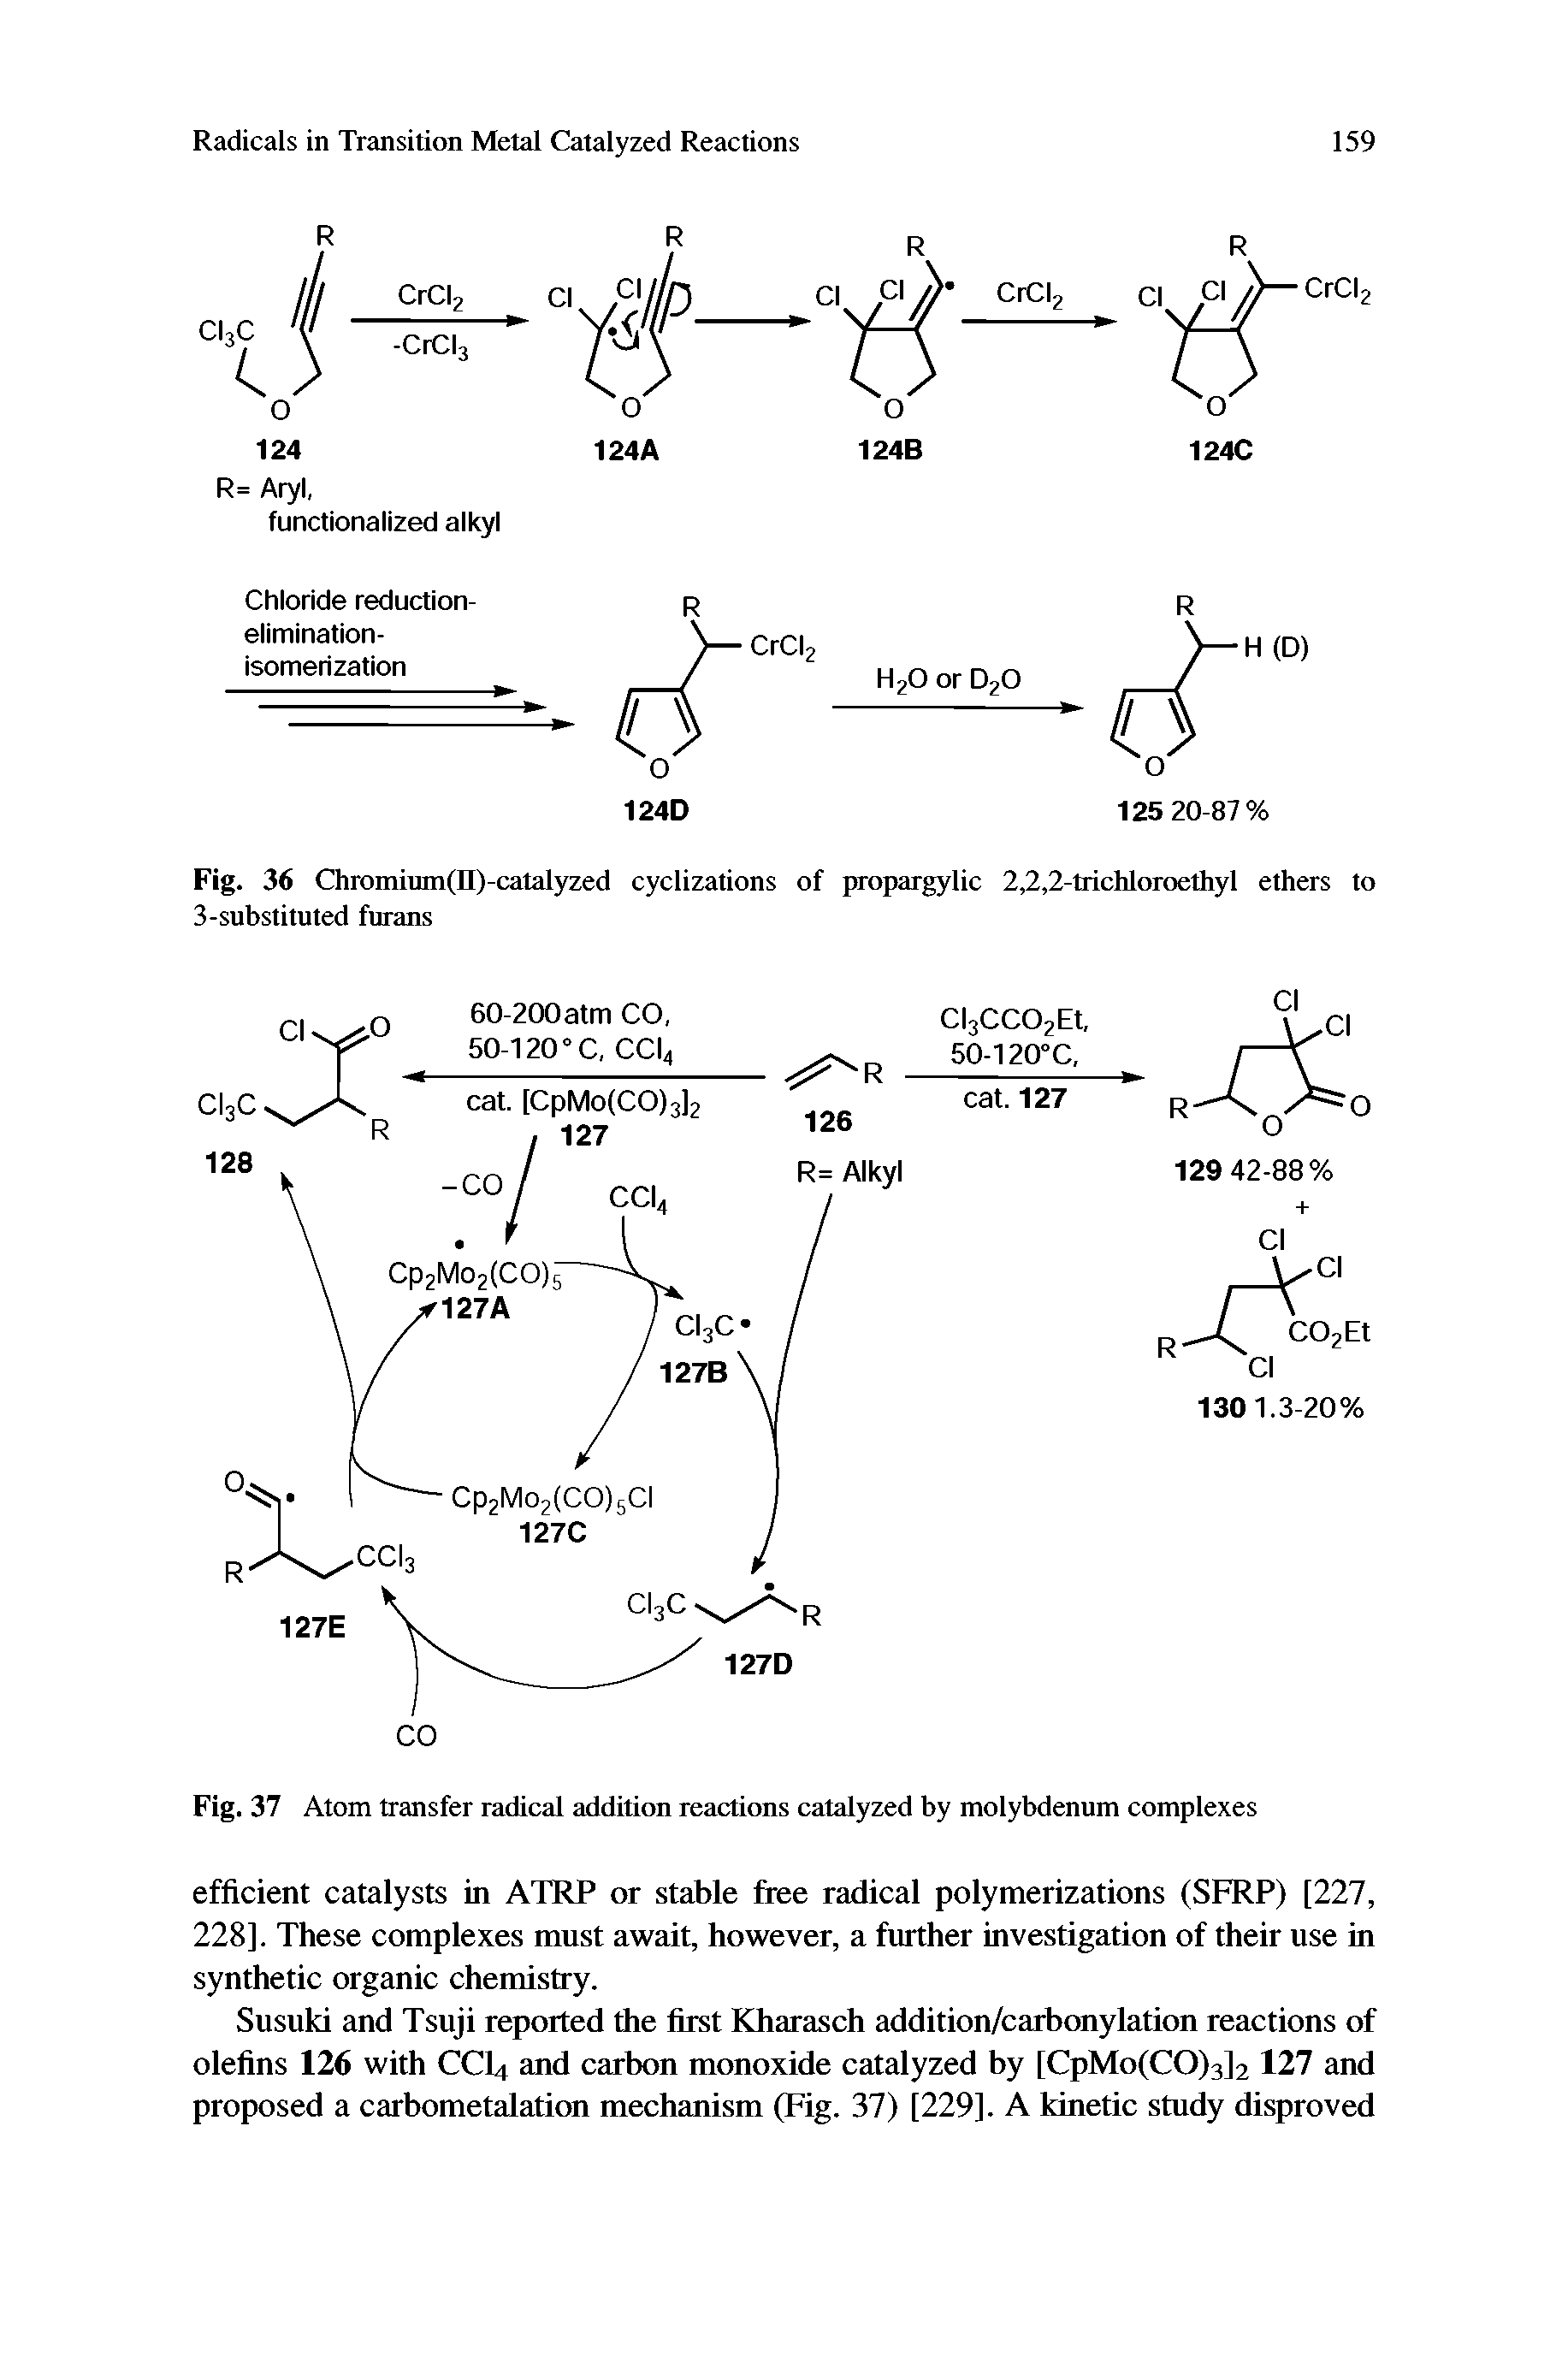 Fig. 36 Chromium(II)-catalyzed cyclizations of propargylic 2,2,2-trichloroethyl ethers to 3-substituted furans...